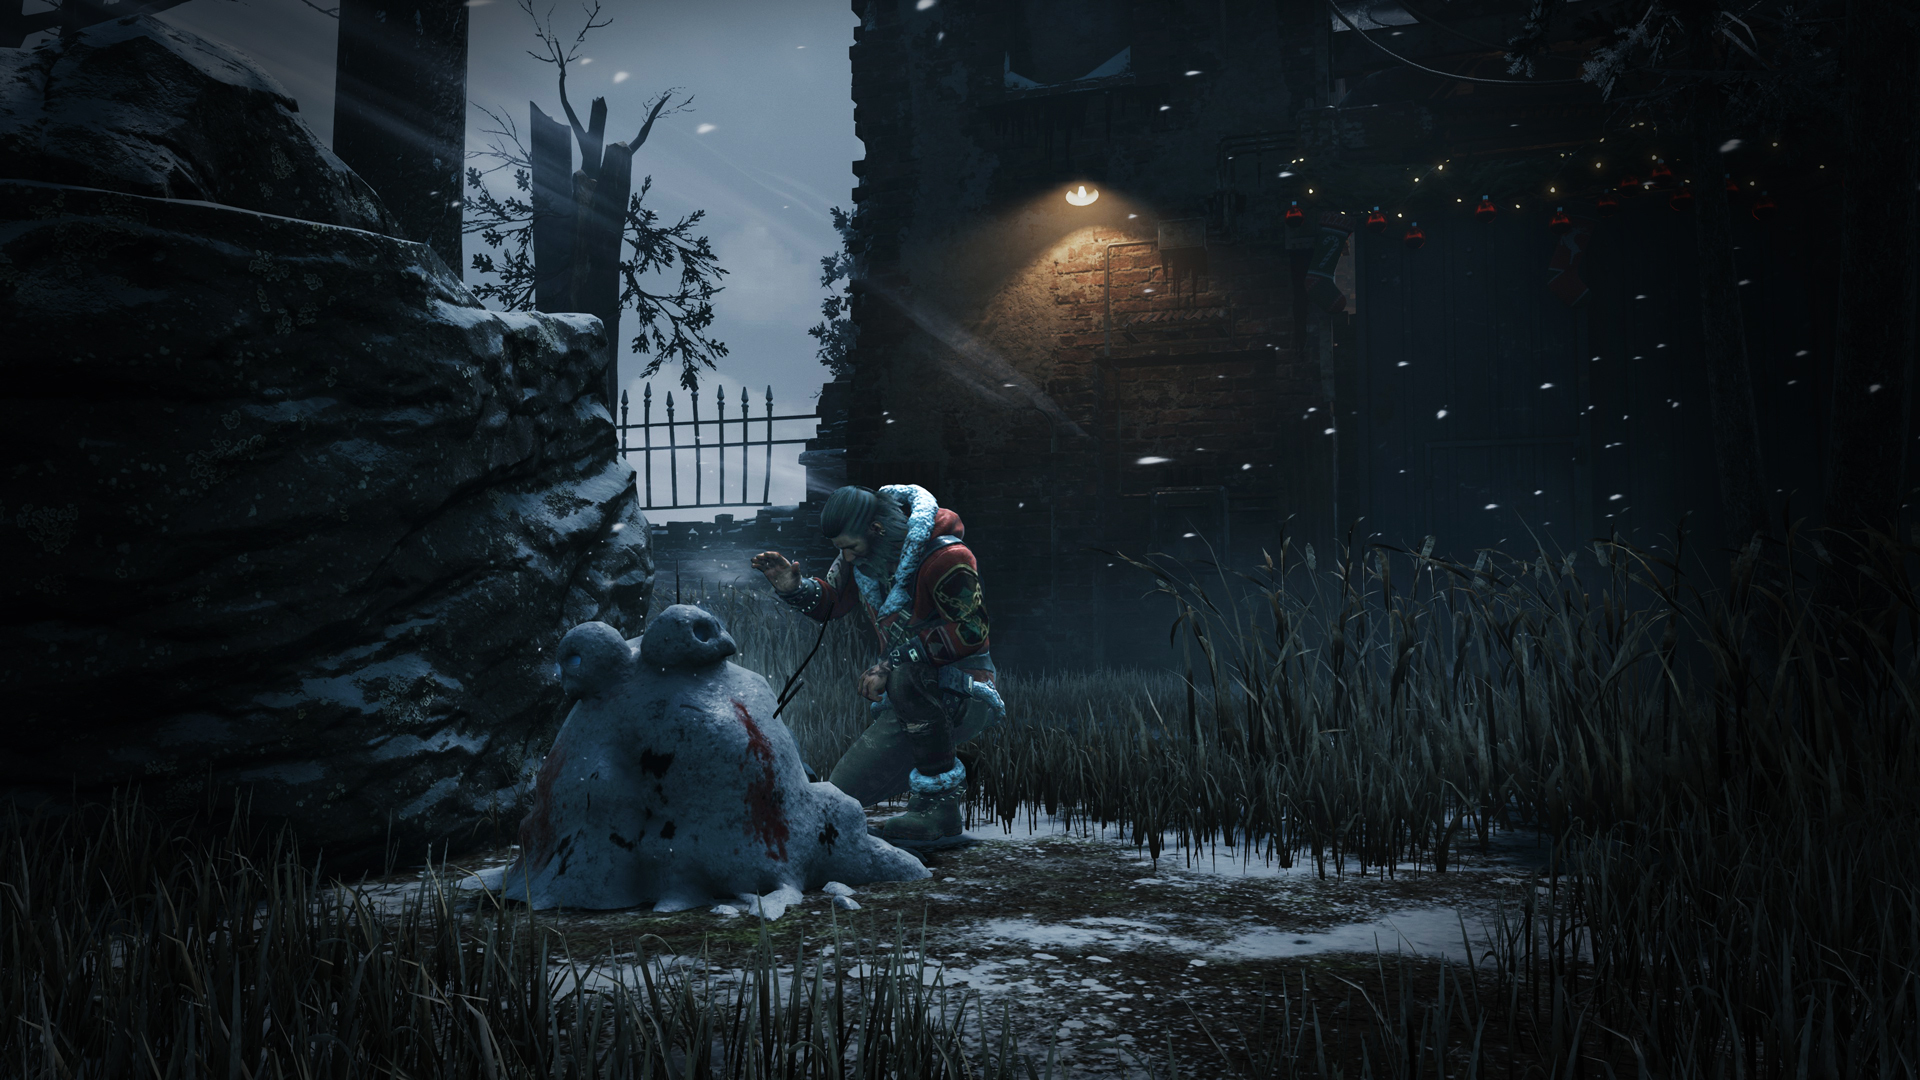 Dead by Daylight Winter Event Bone Chill Begins Today - EIP Gaming